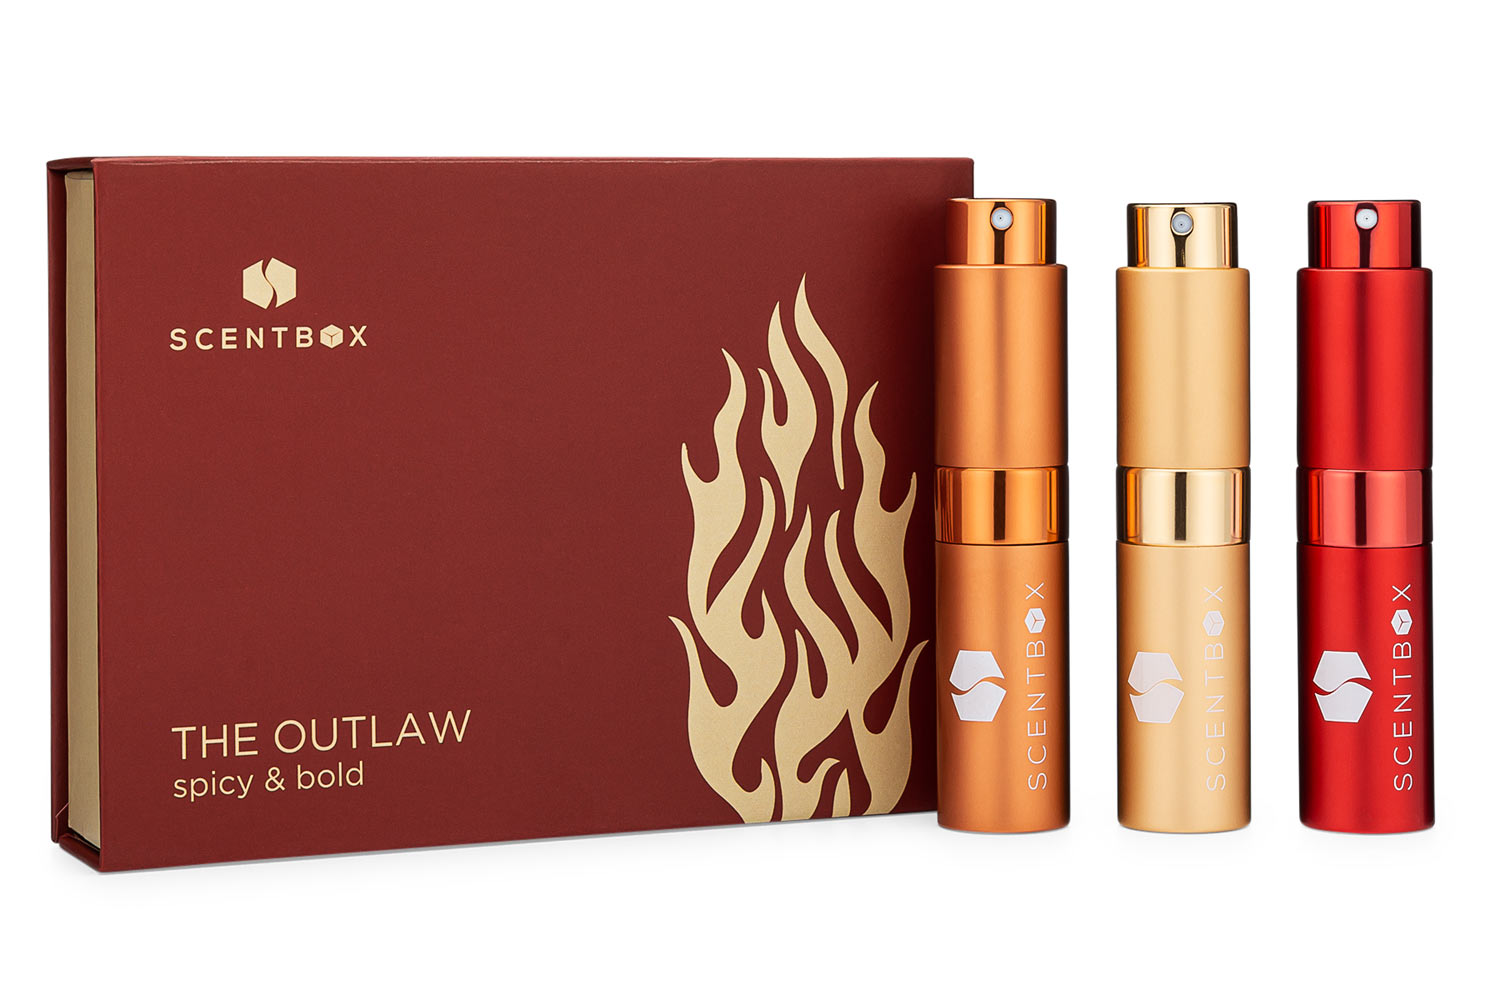 The Outlaw Gift Set ScentBox Image